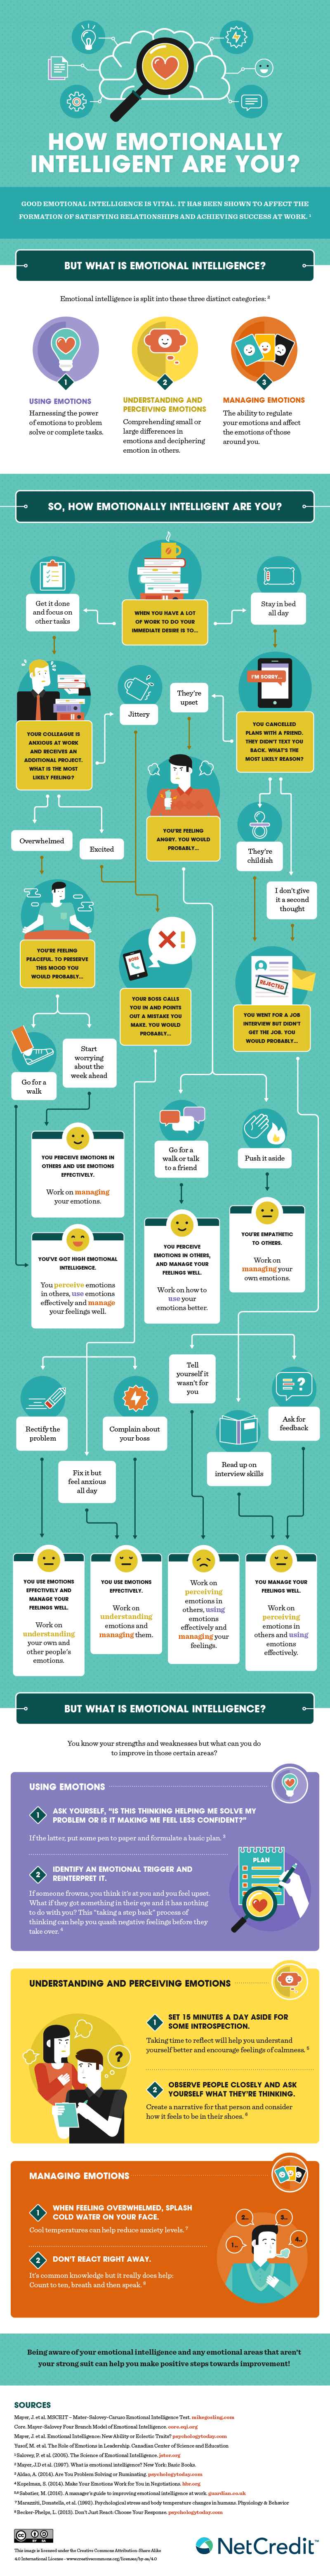 How Emotionally Intelligent Are You? - #infographic